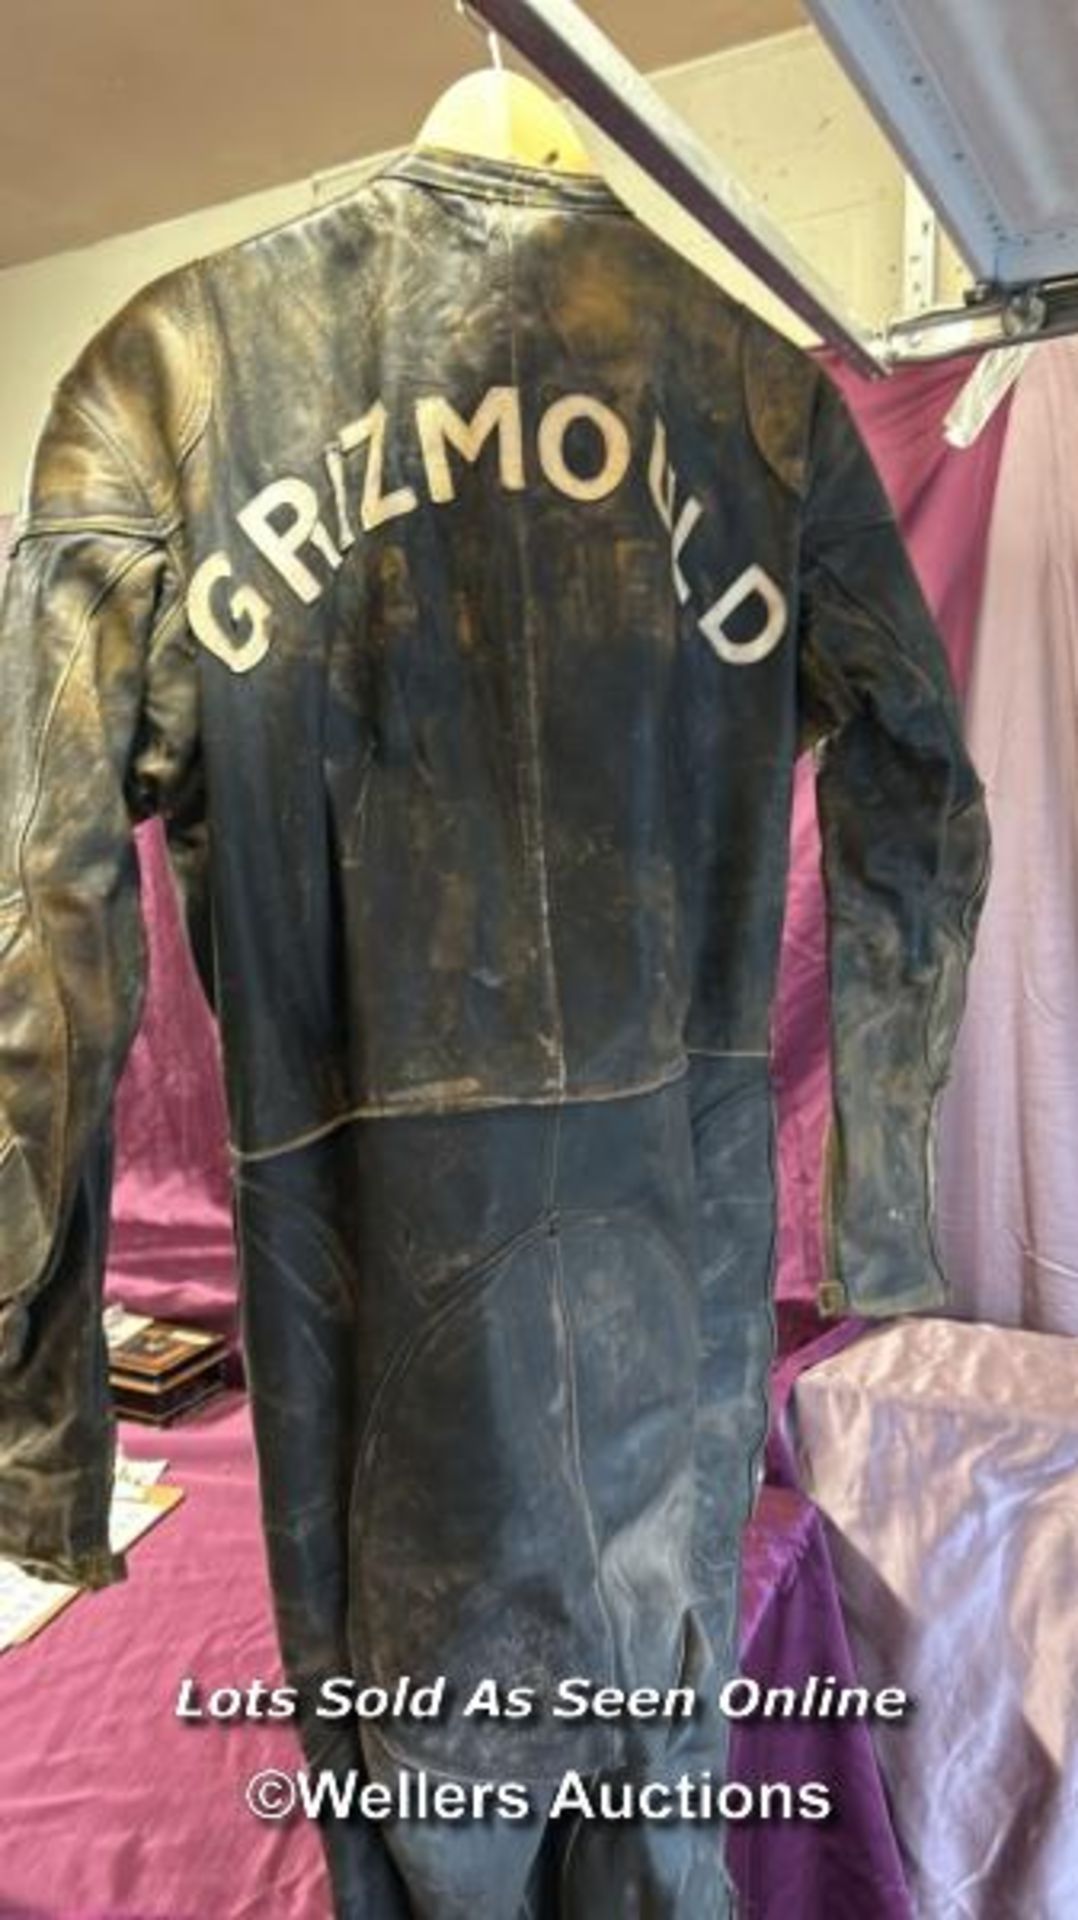 BIKERS ALL-IN-ONE LEWIS LEATHERS WITH THE NAME GRIZMOULD - Image 5 of 5